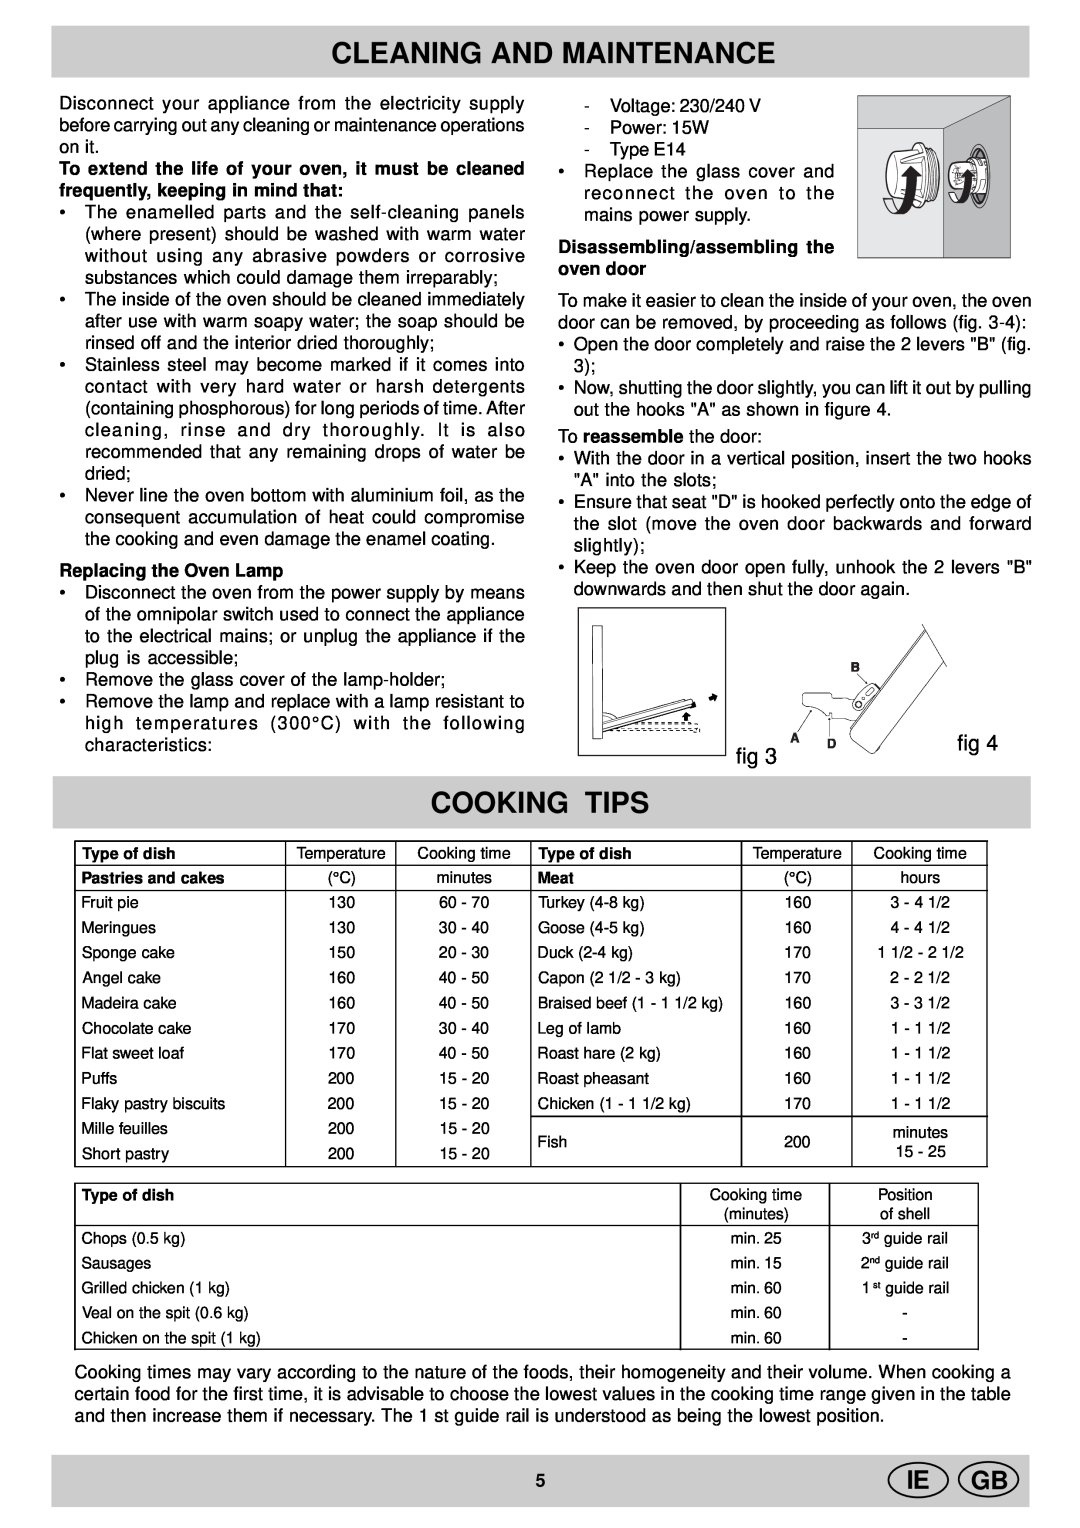 Indesit KP 9507 EB, KP 958 MS.B manual Cleaning And Maintenance, Cooking Tips, Ie Gb, Replacing the Oven Lamp 